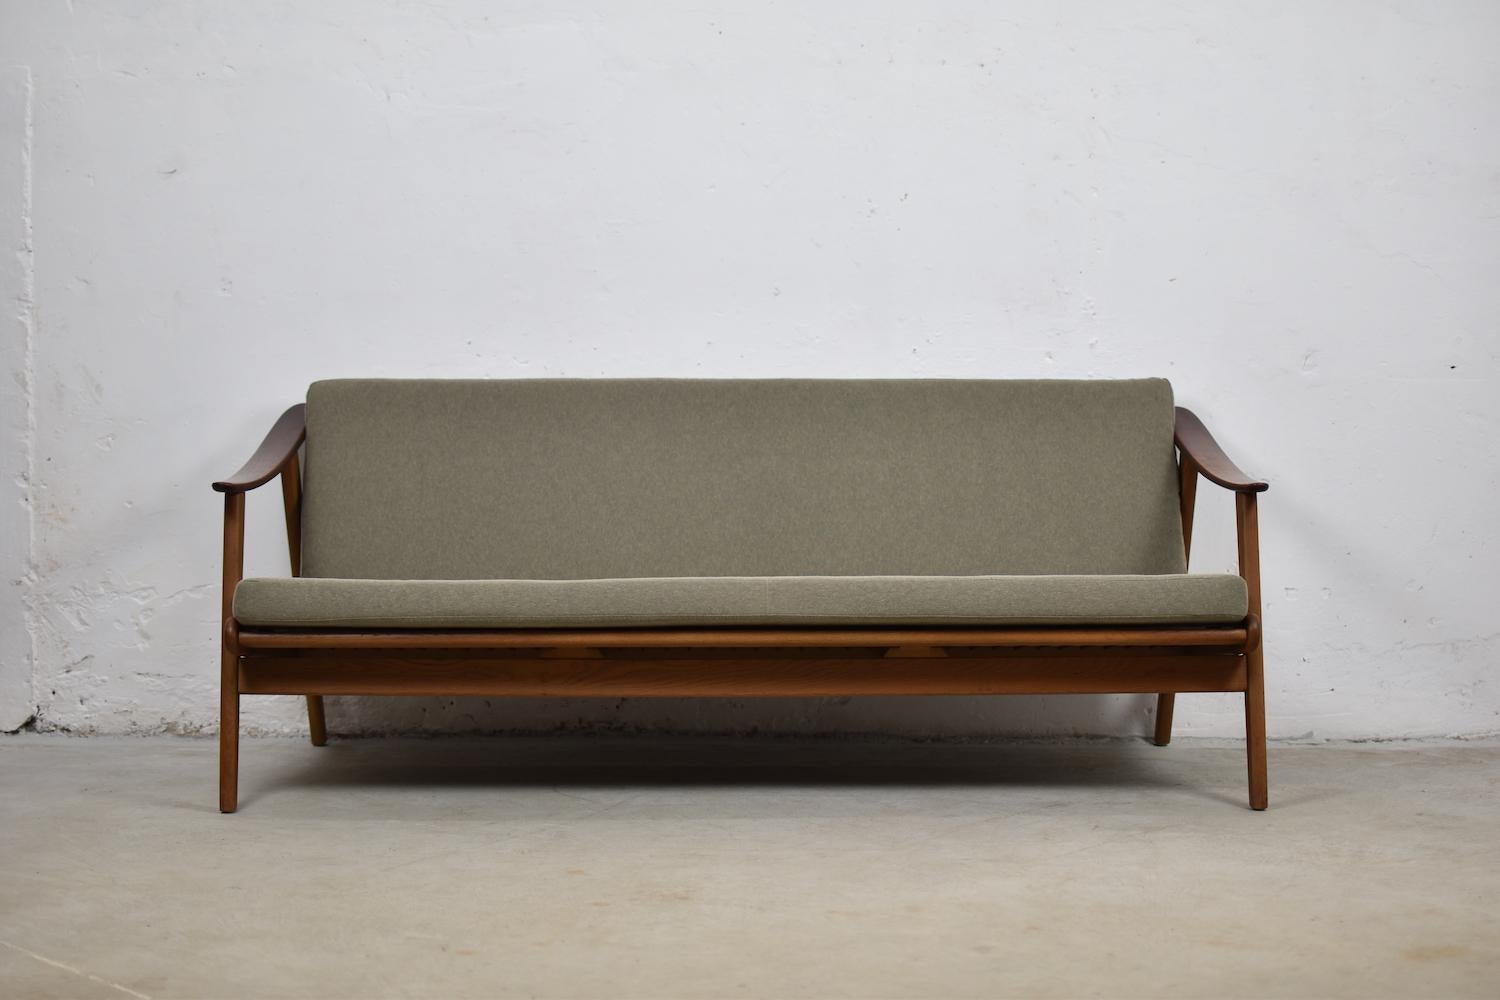 Lovely modernist three-seat from Denmark, 1960s. This sofa is made out of oak and has arm rests made out of teak. Freshly re-upholstered in a grey-green fabric. Clean lines, nice open back. Matching pair of easy chairs is also available.